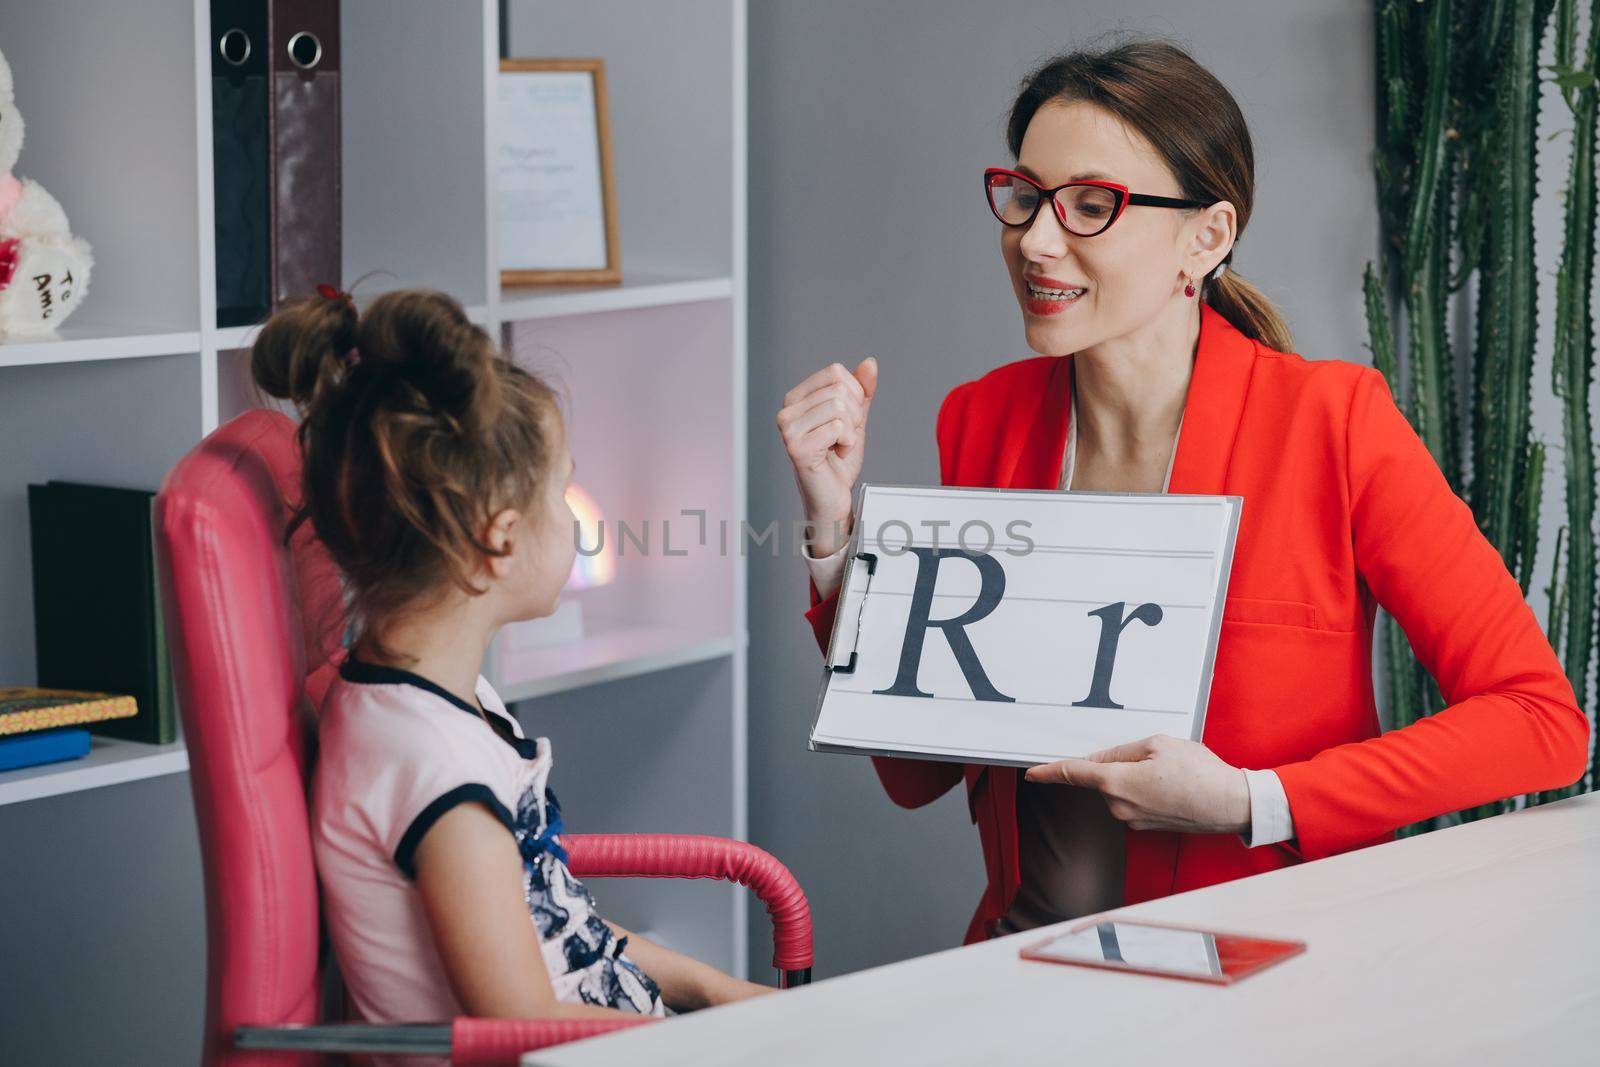 Speech therapist teaches the girls to say the letter R. Speech therapist holding letter R and girl back view.